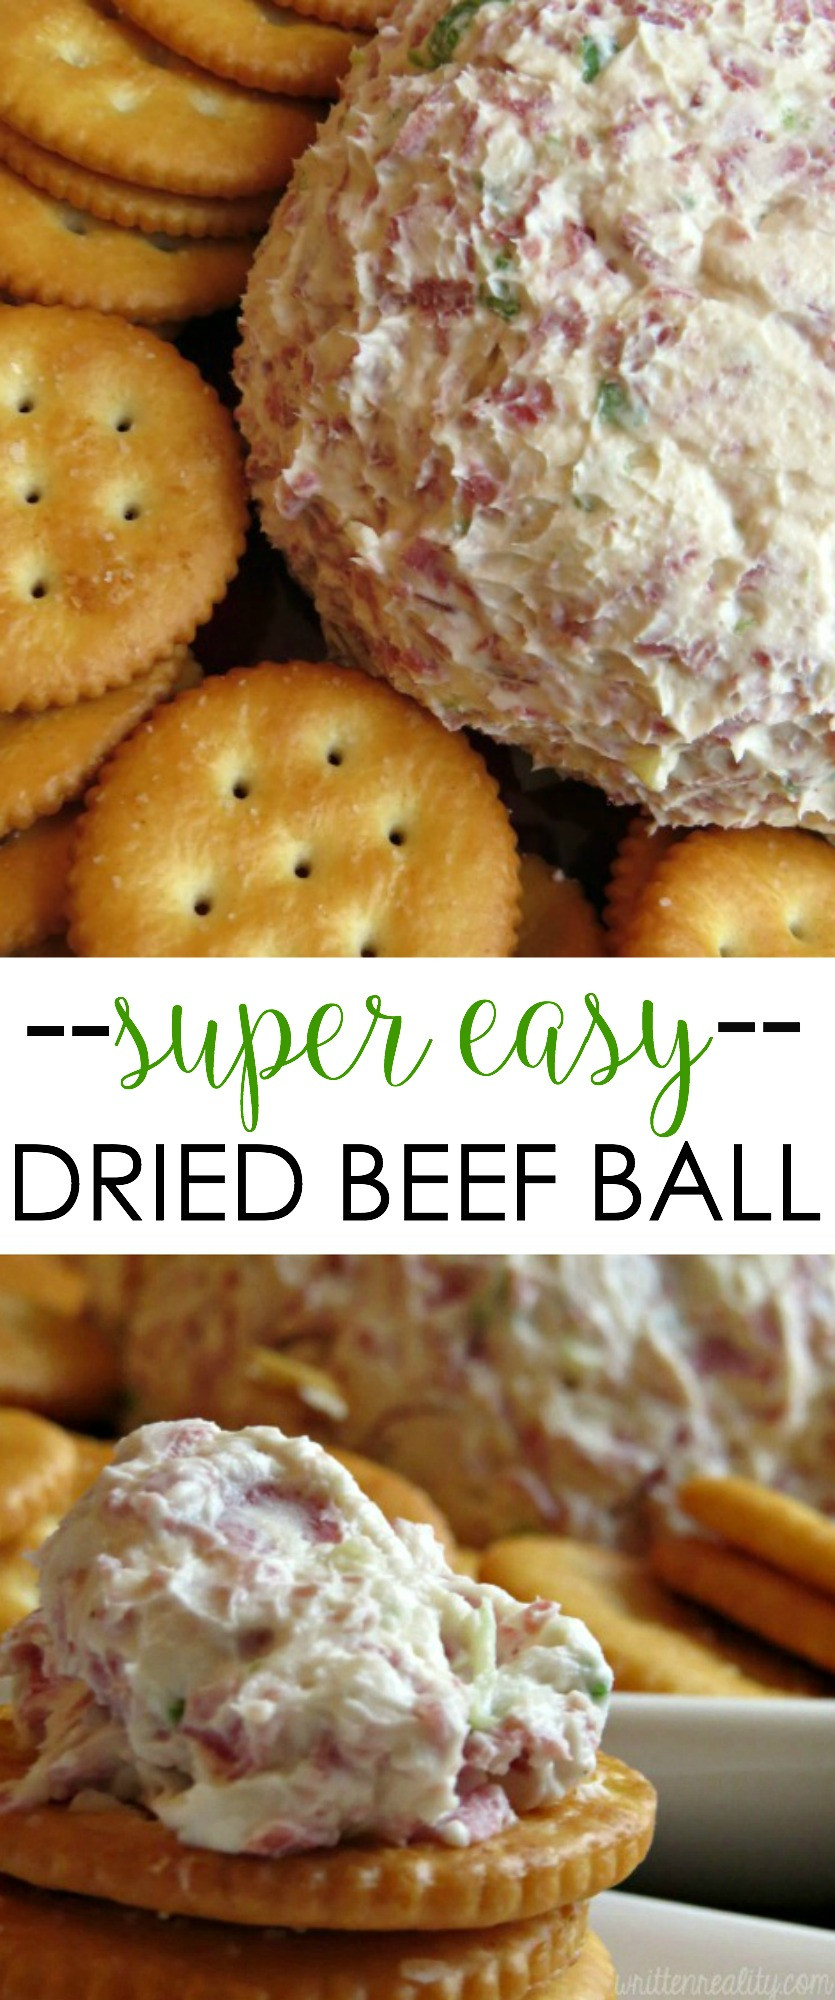 Appetizers With Cream Cheese
 Dried Beef Ball Recipe Written Reality